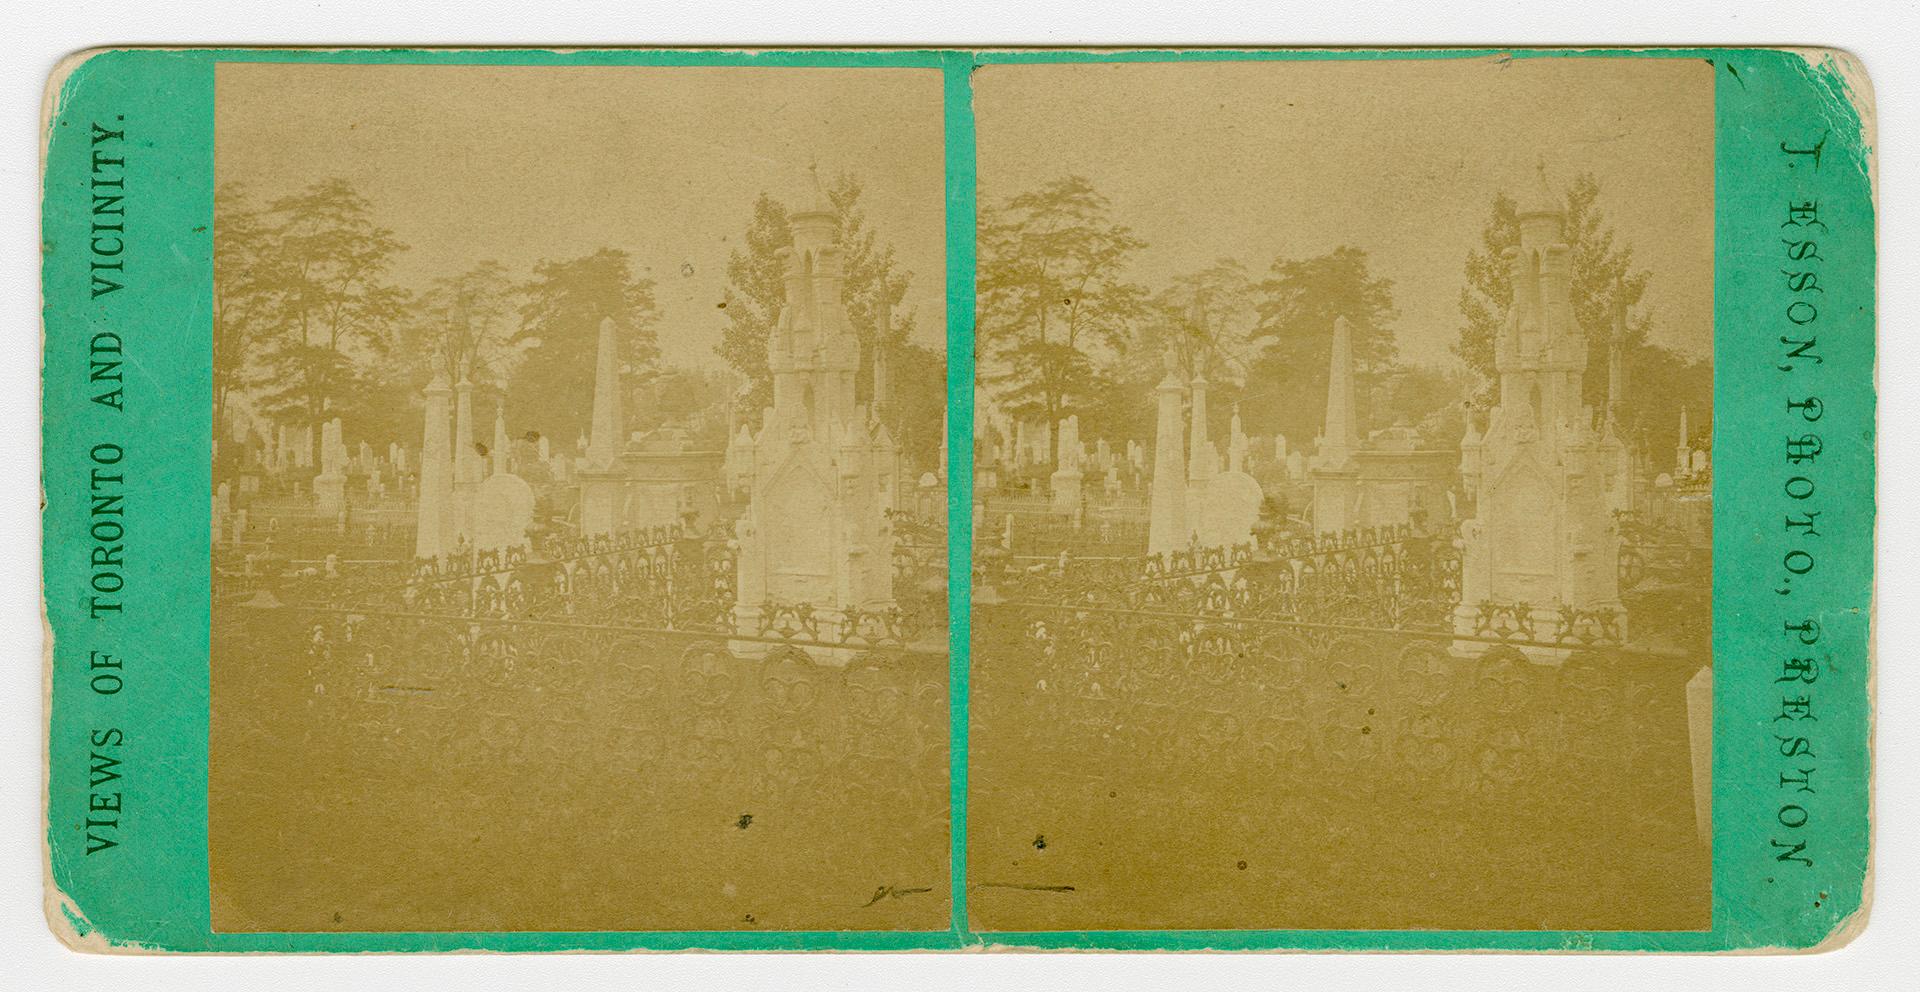 Pictures show elaborate headstones in a graveyard.